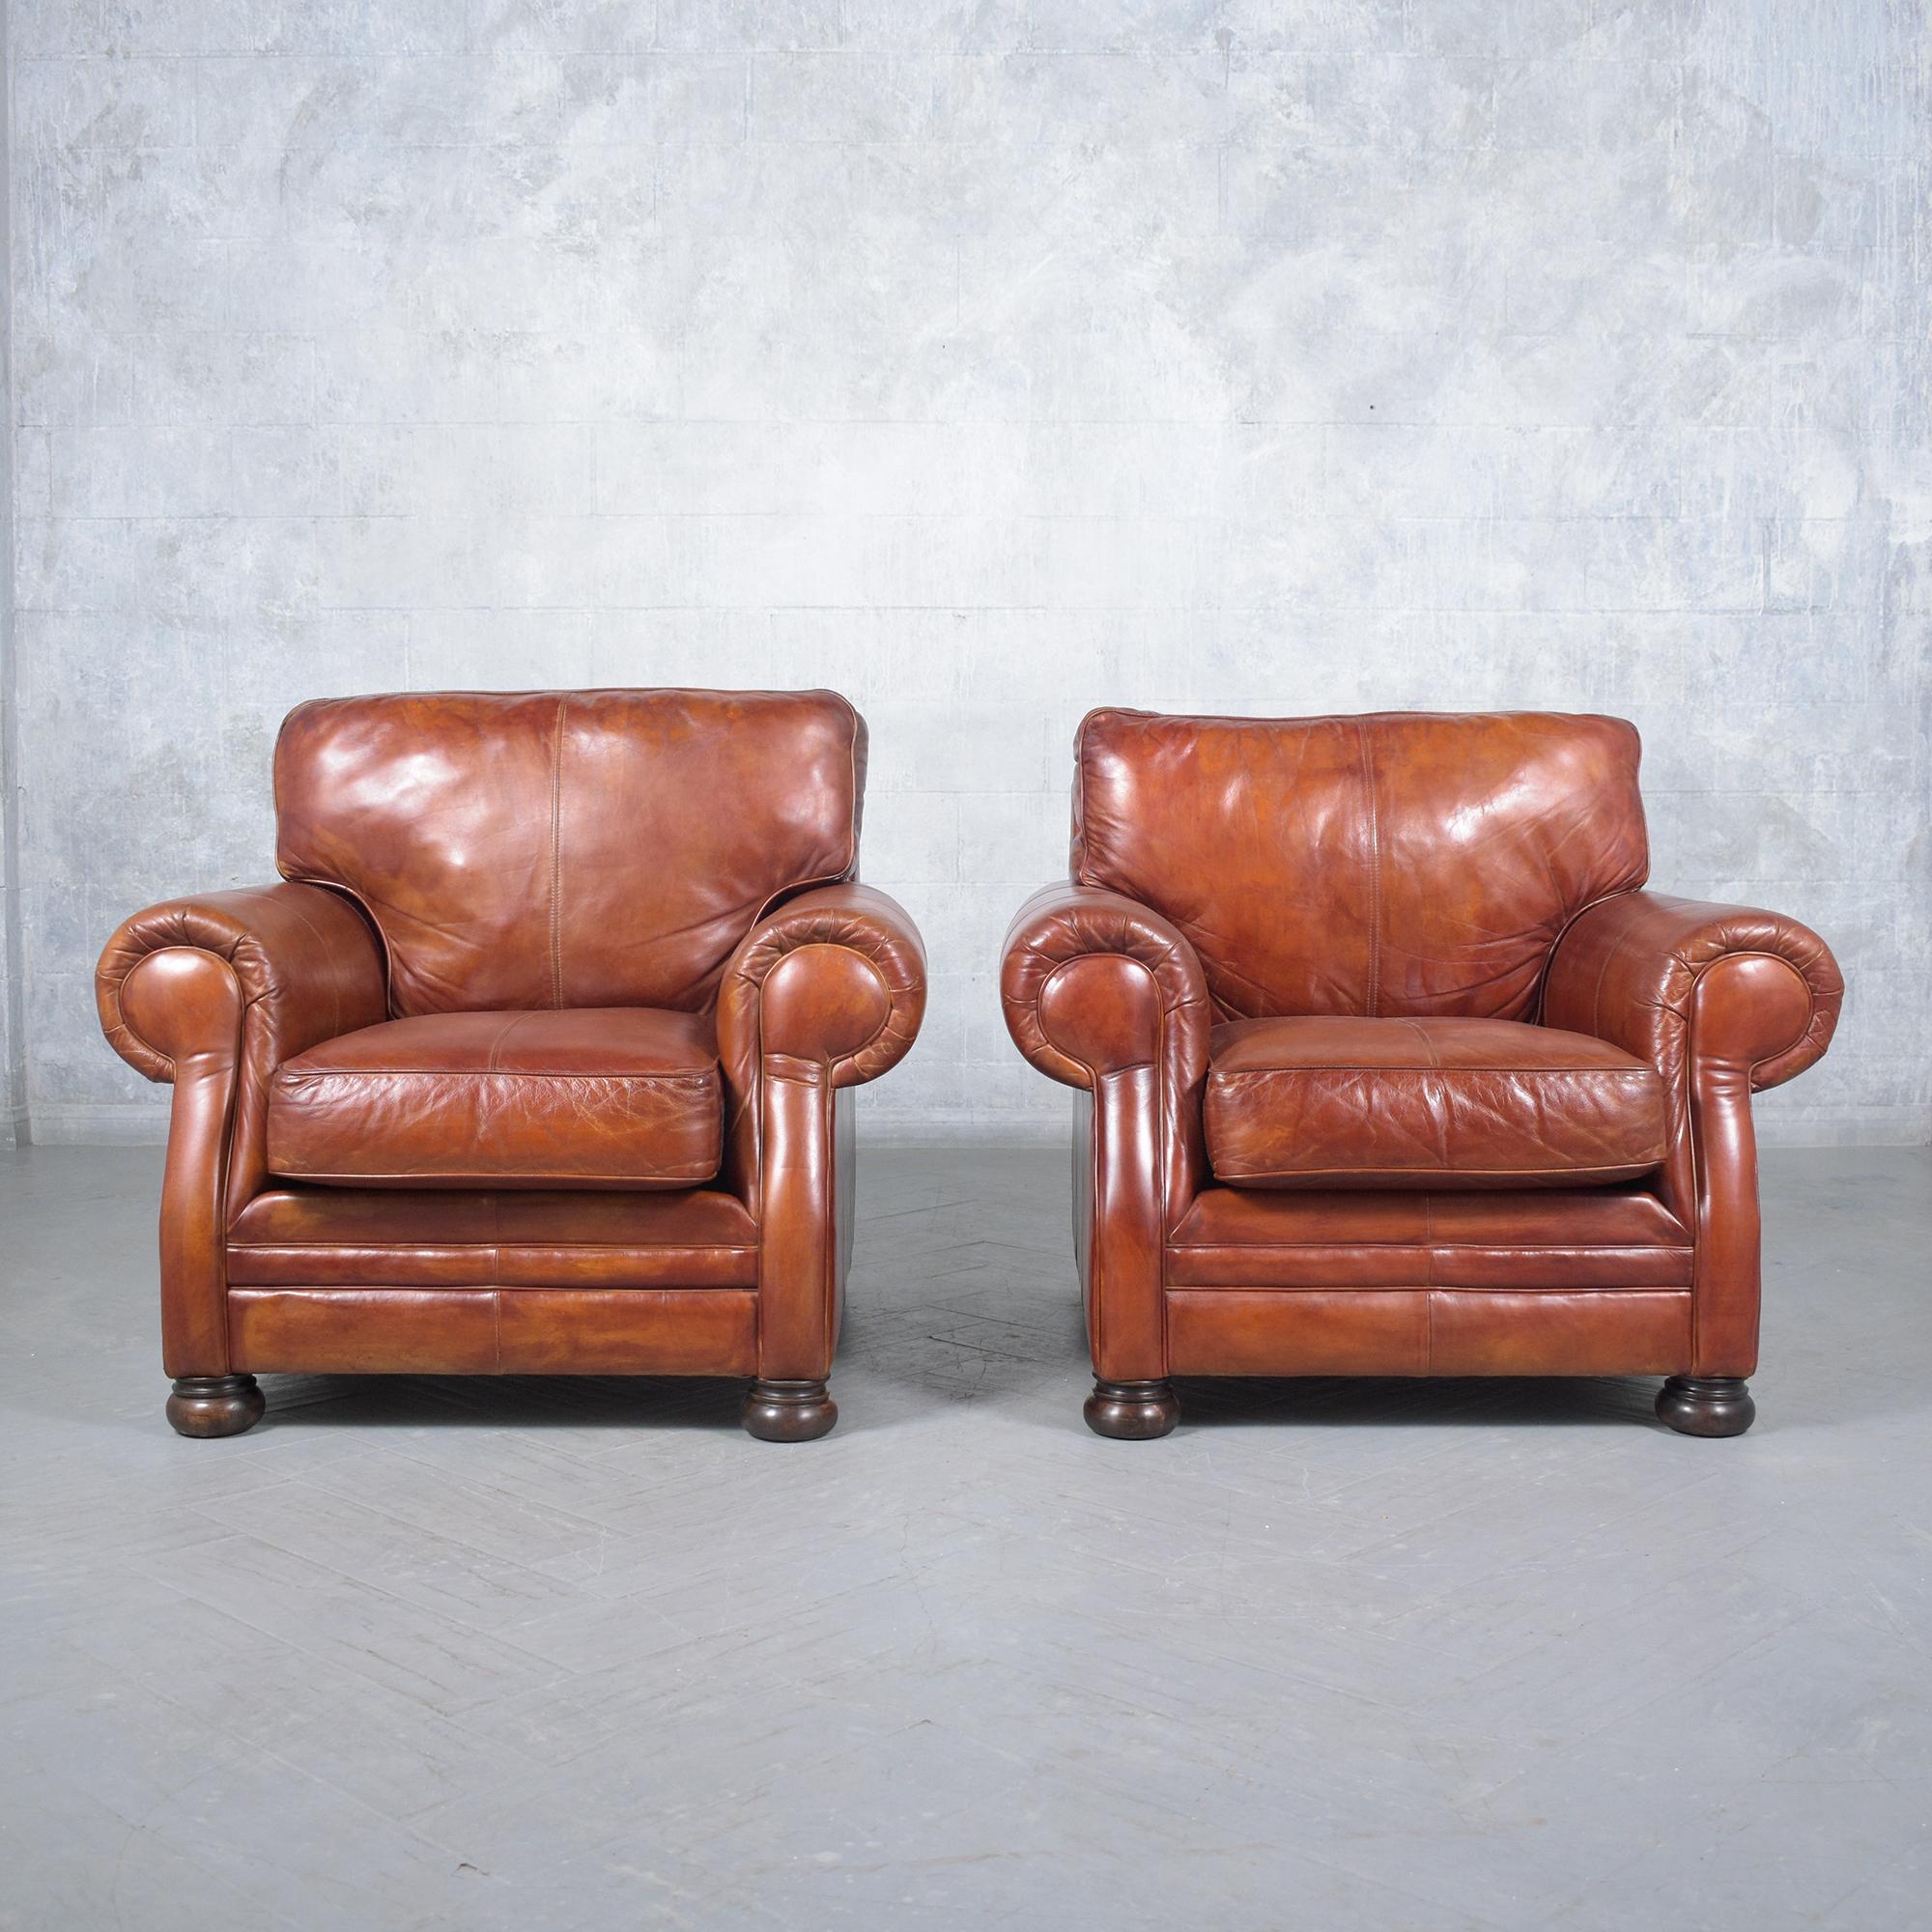 Discover the unmatched charm of our pair of vintage leather armchairs, beautifully crafted and meticulously restored by our professional expert craftsman team. These vintage club chairs are a testament to timeless design and exceptional